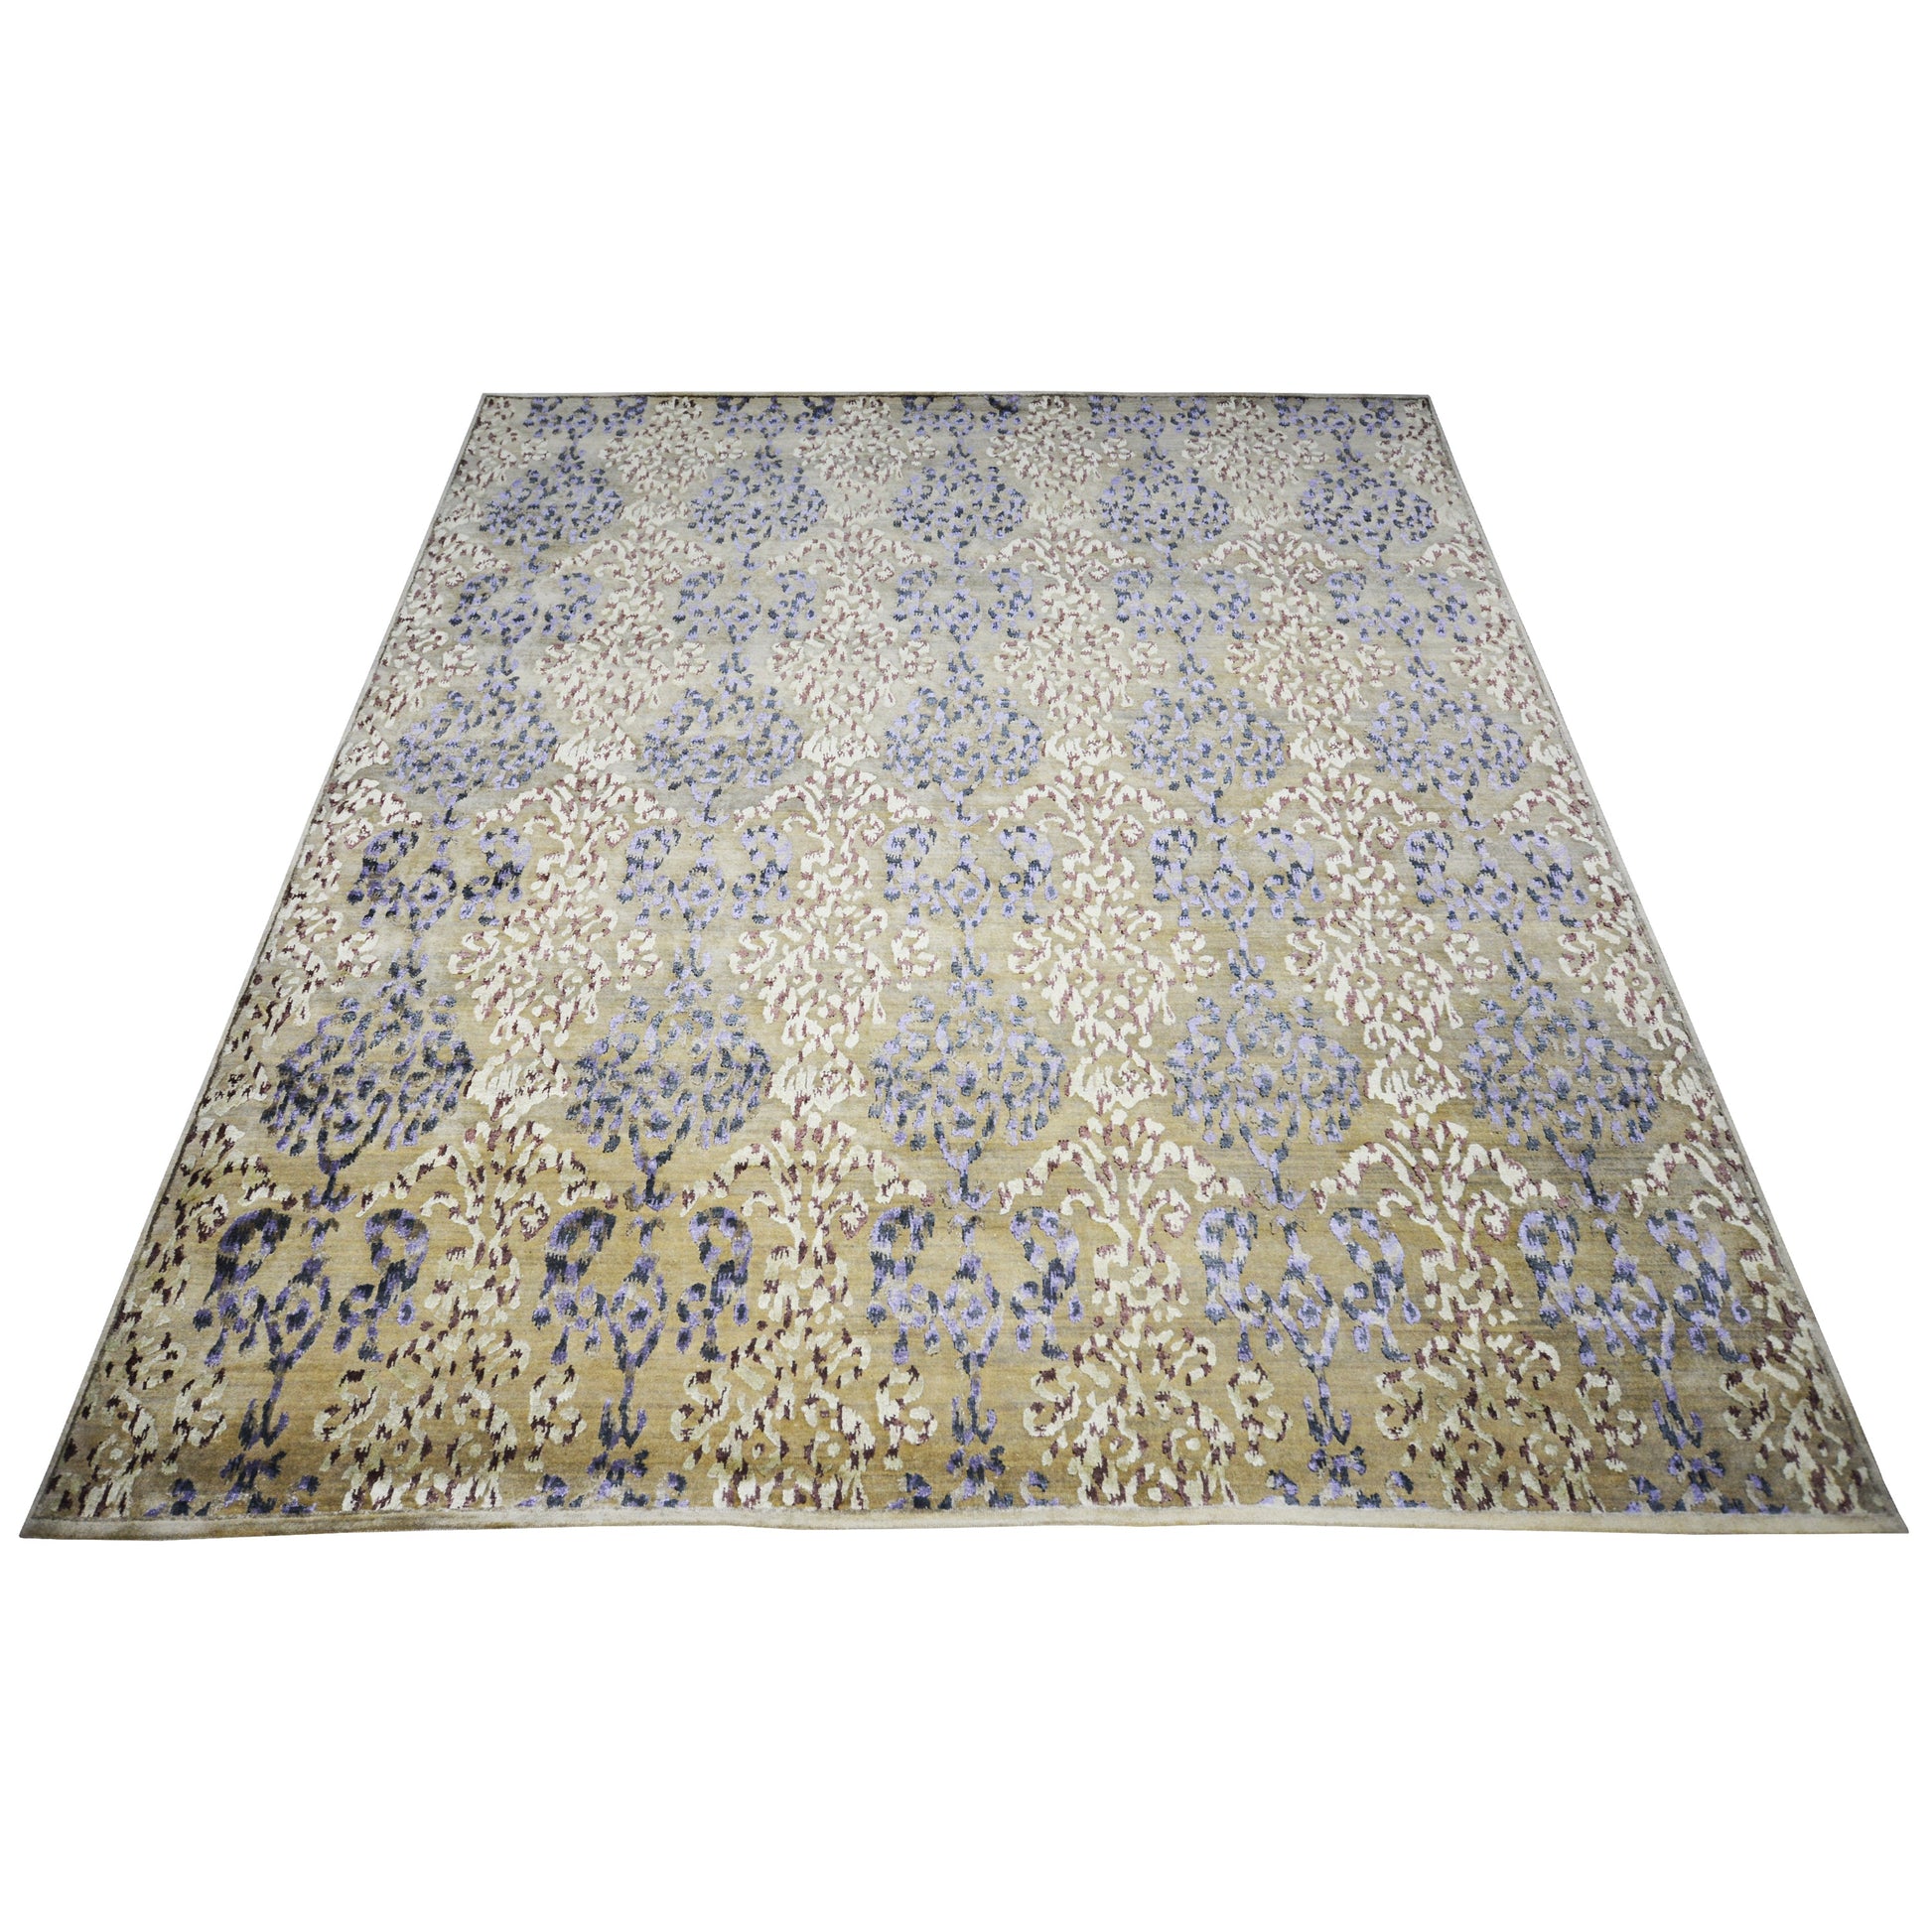 Get trendy with Floral Camel, Ivory Red and Lavender Transitional Damask Handknotted Area Rug - Contemporary Rugs available at Jaipur Oriental Rugs. Grab yours for $4375.00 today!